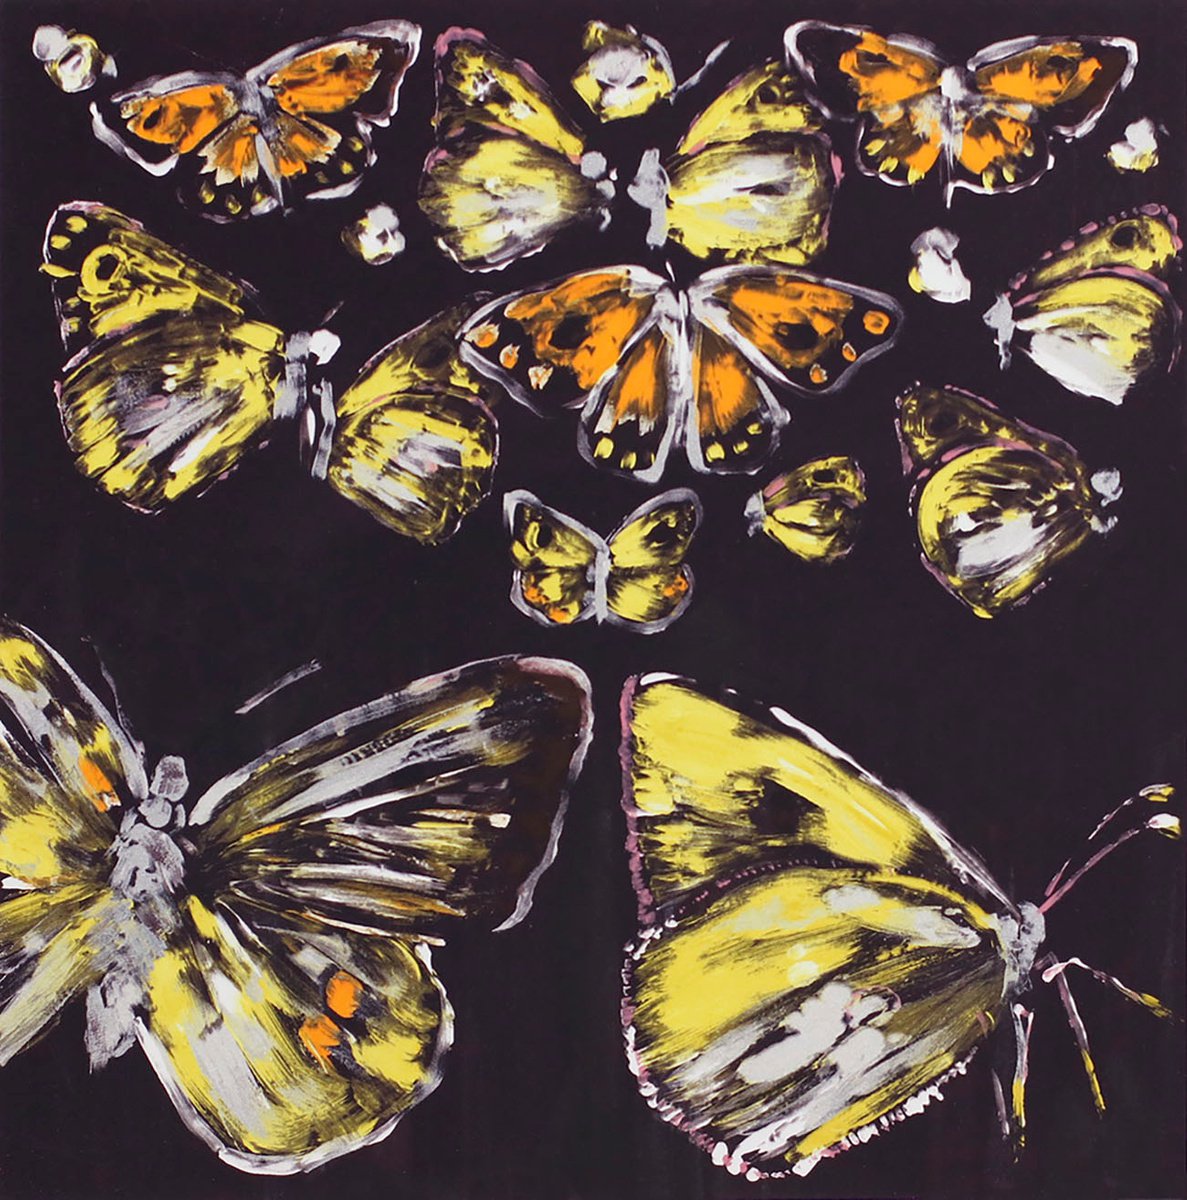 Clouded Yellows III by Helen Boden